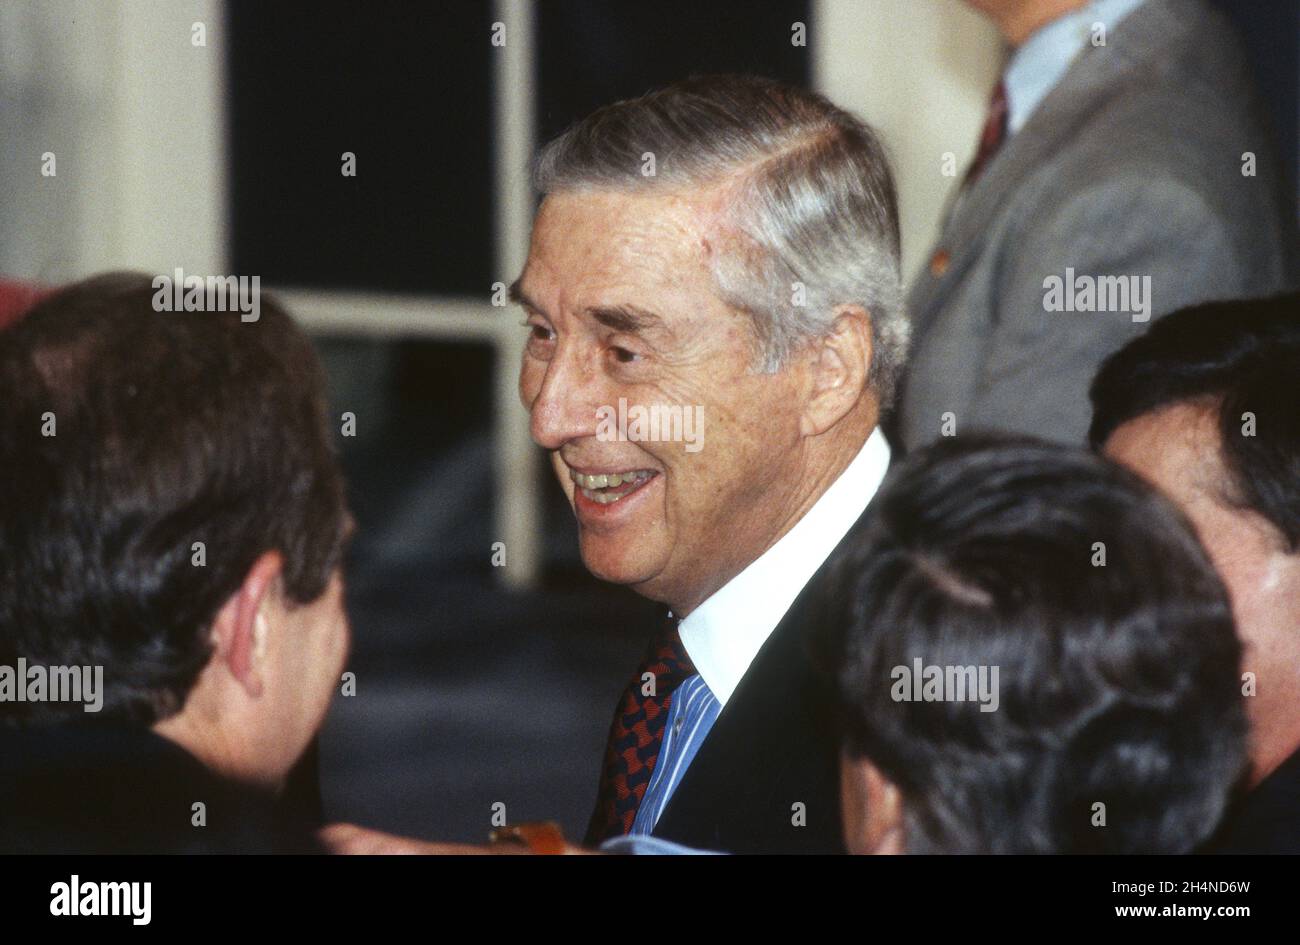 United States Secretary of the Treasury Lloyd Bentsen greets guests as he attends the signing of the multinational GATT Treaty at the Organization of American States Building in Washington, DC on Thursday, December 8, 1994.Credit: Ron Sachs / CNP / MediaPunch Stock Photo